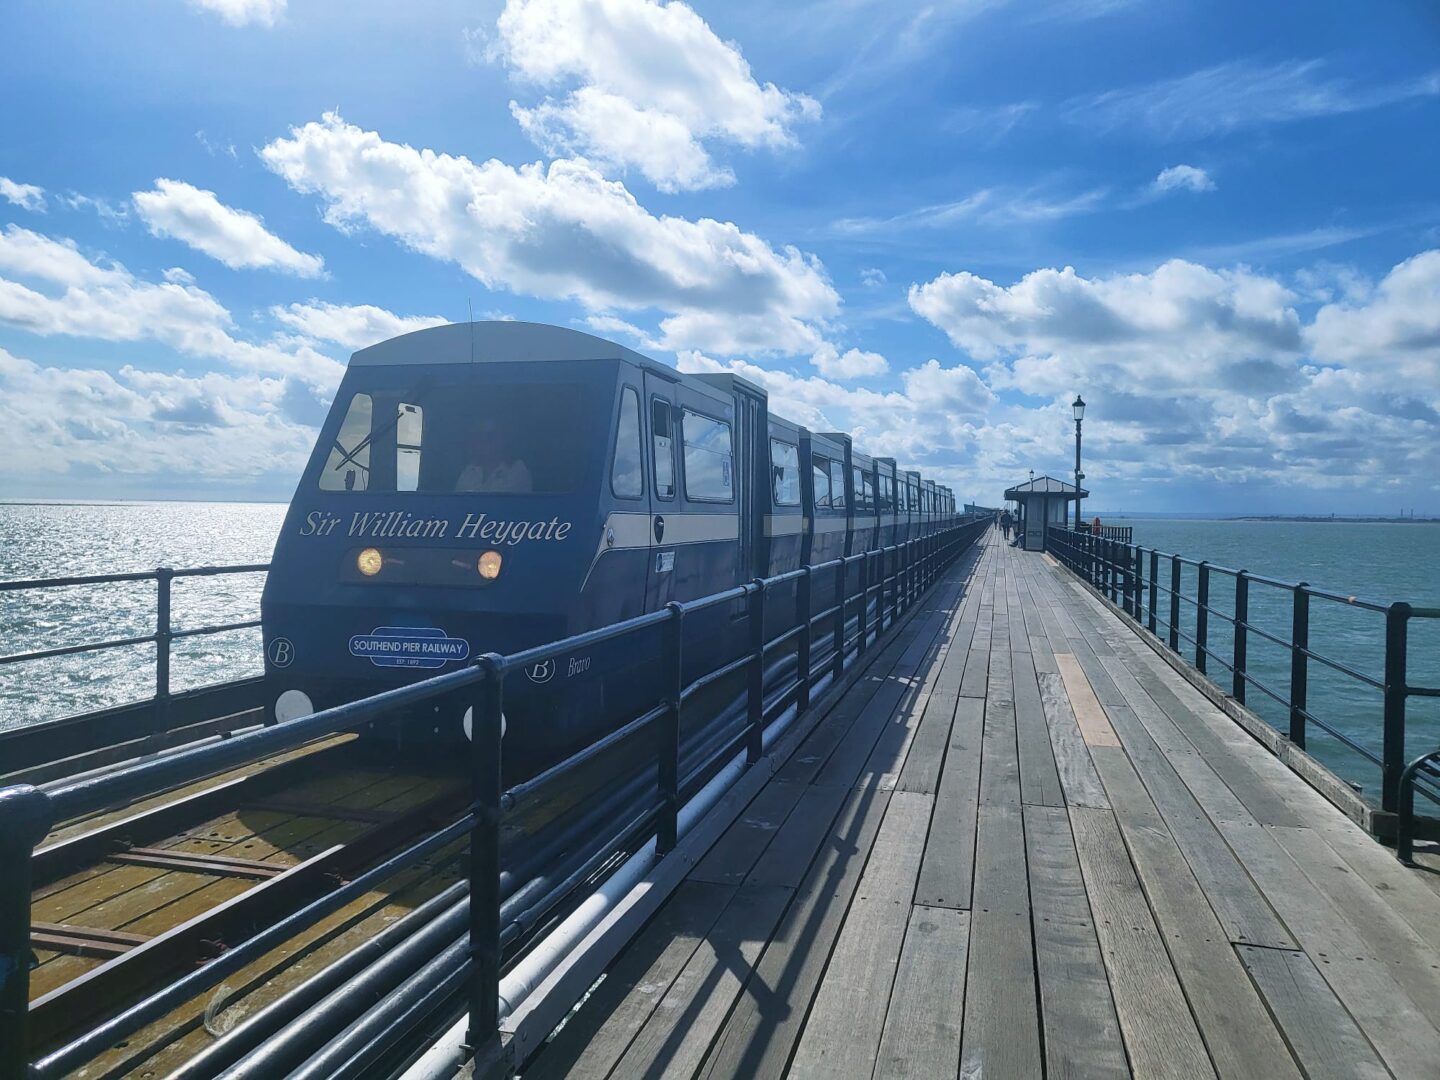 Southend Pier and Railway Train on Track